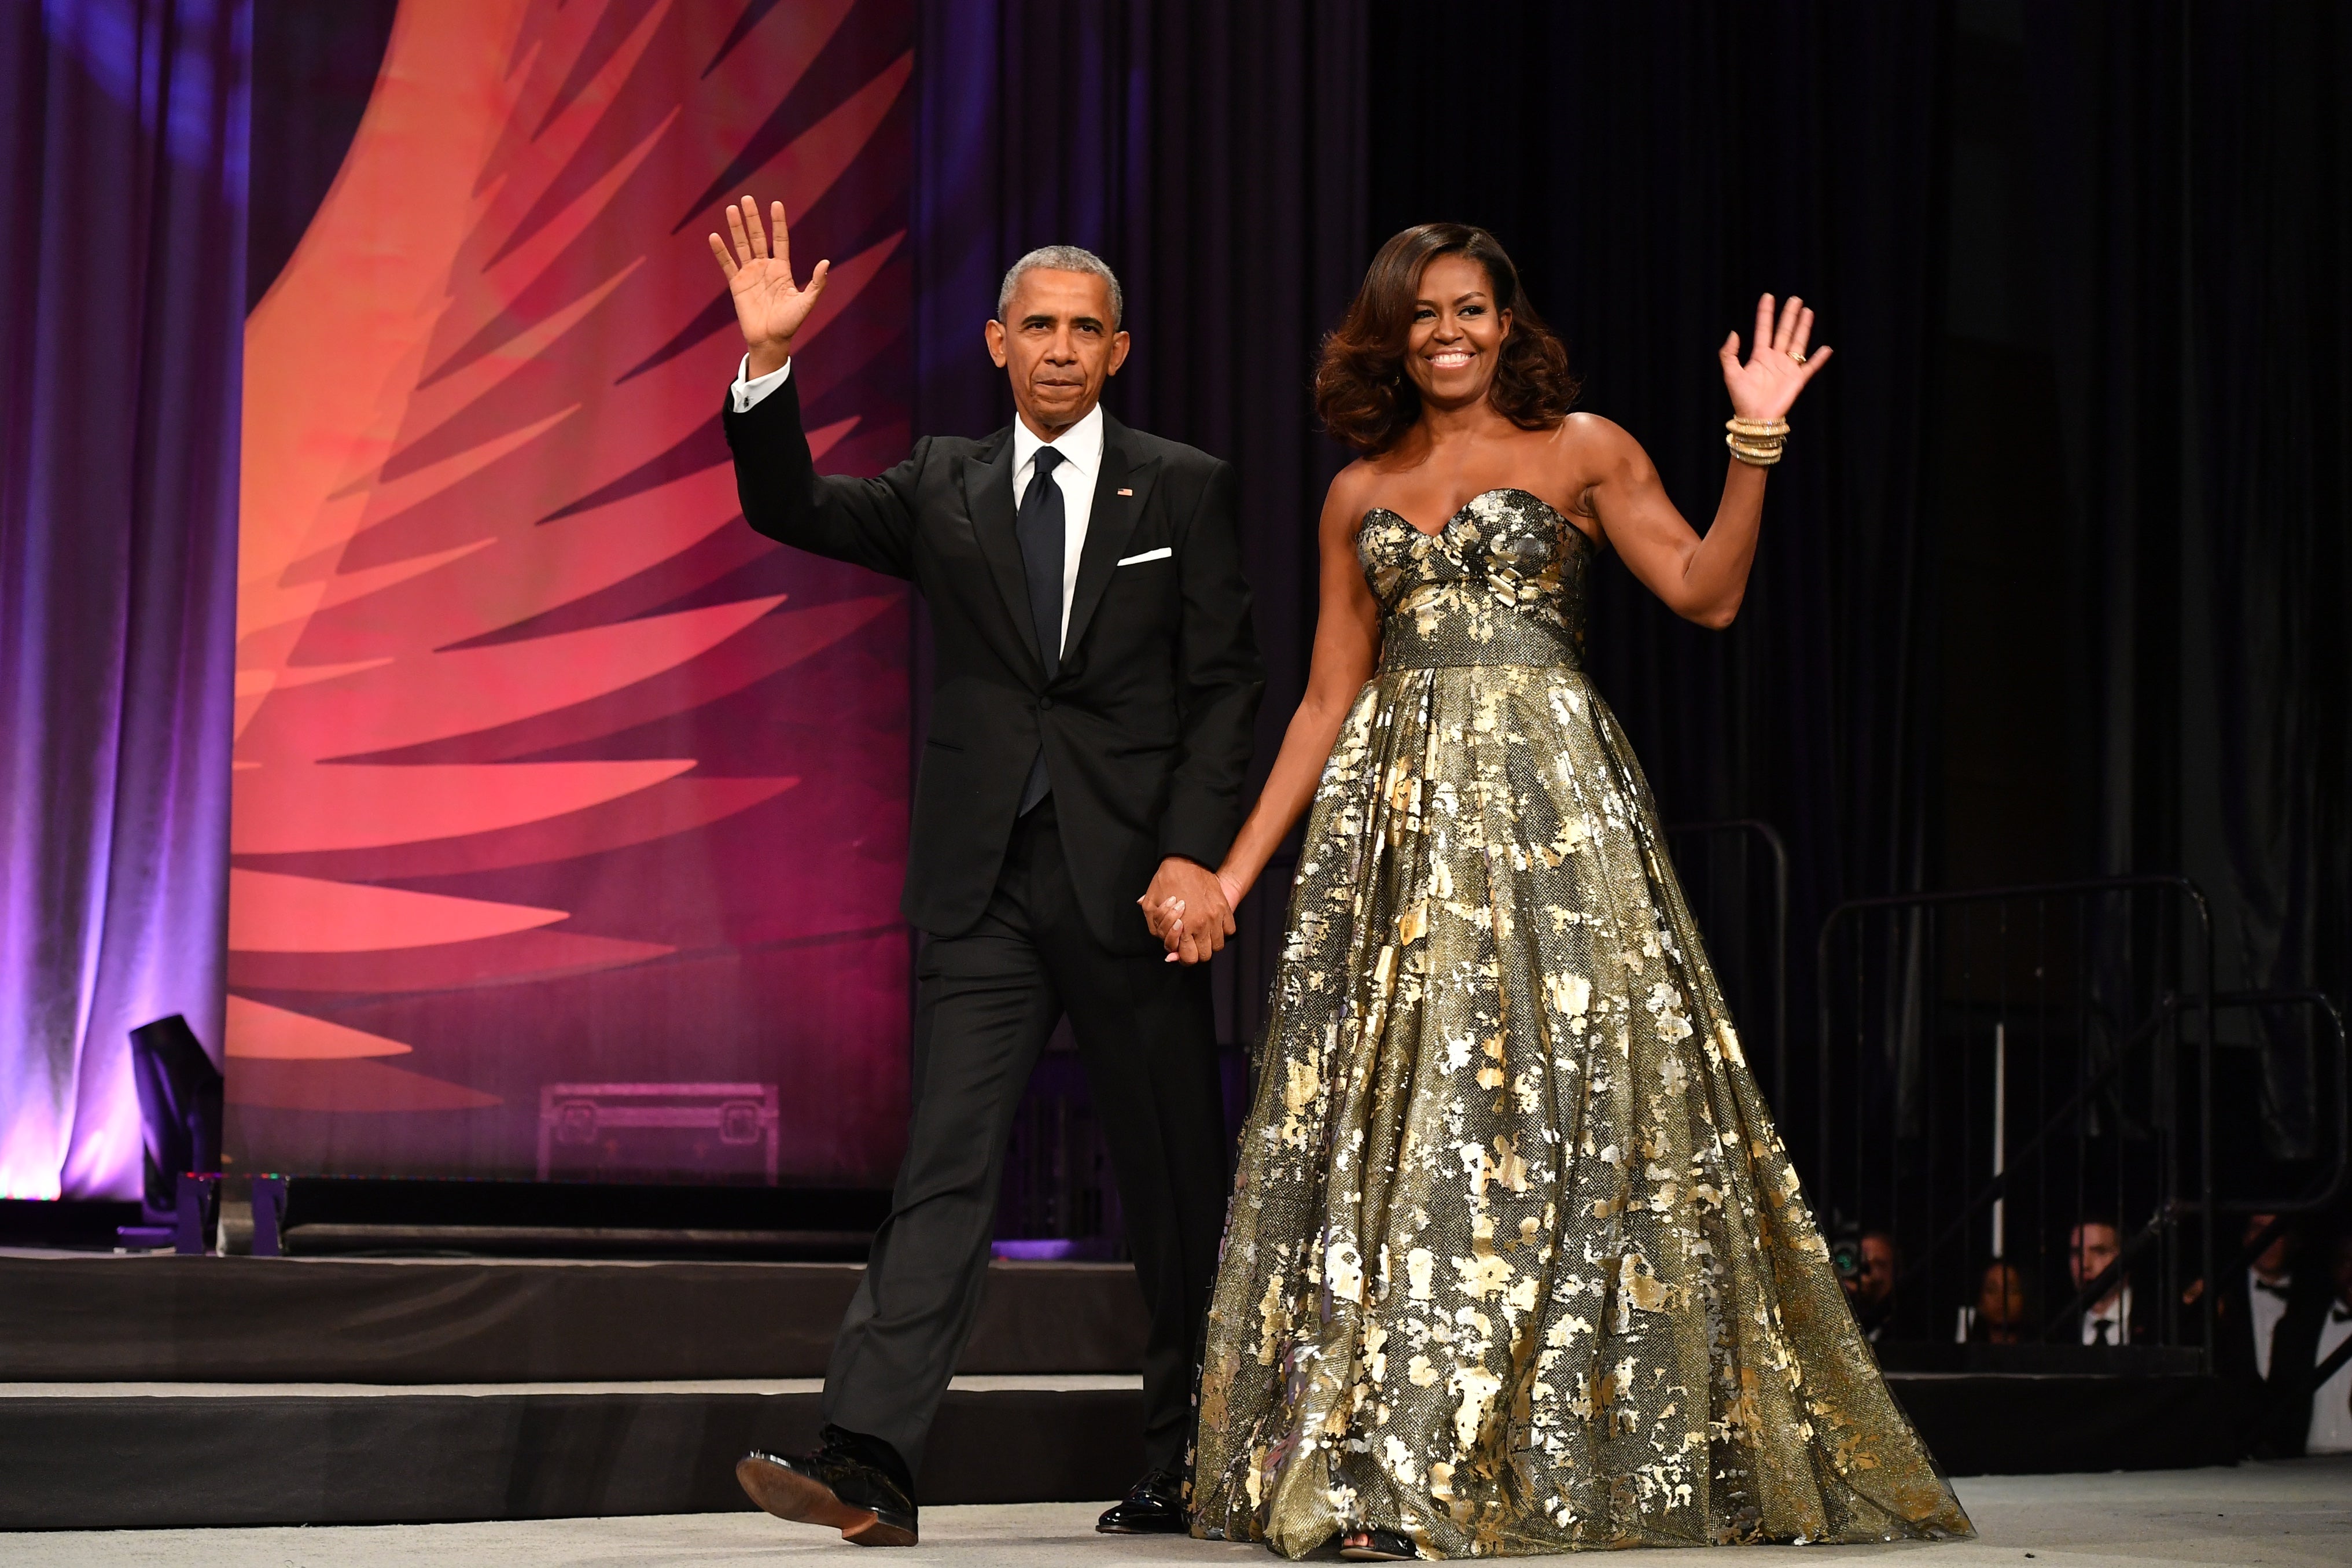 Michelle Obama's Most Fashionable Moments of 2016
